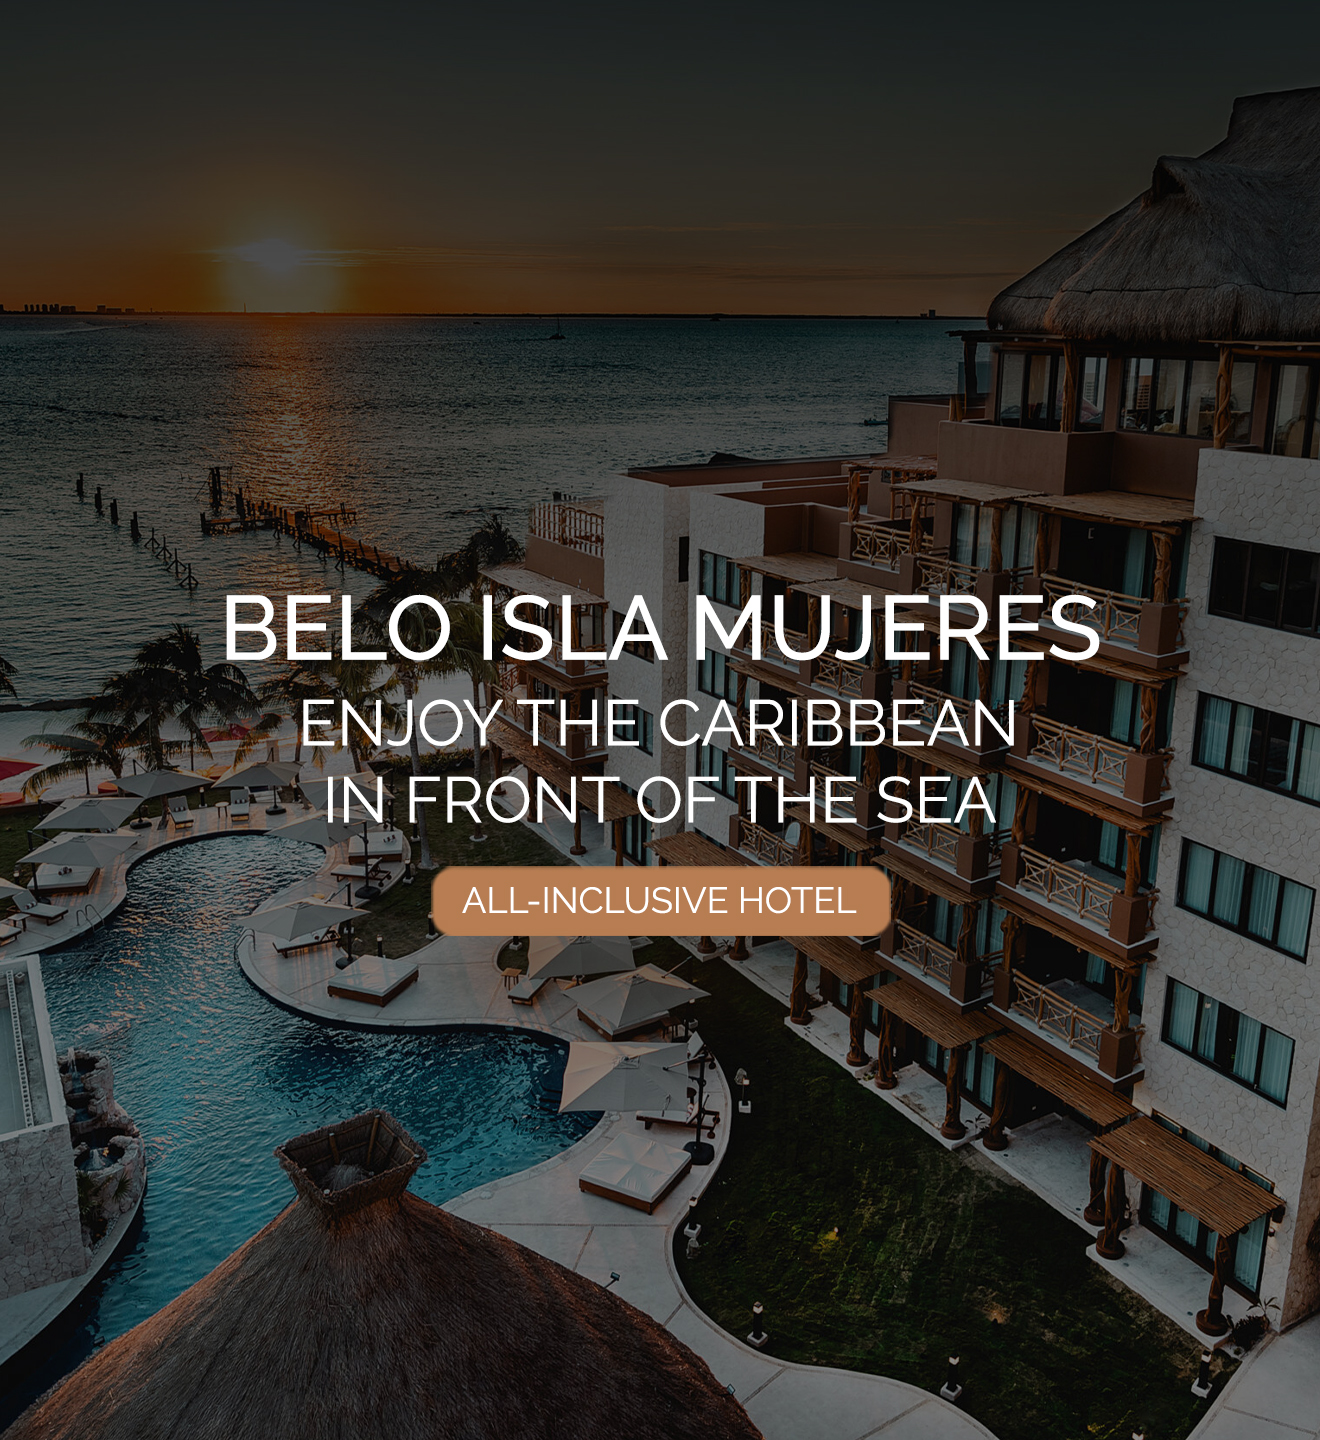 BELO ISLA MUJERES ENJOY THE CARIBBEAN IN FRONT OF THE SEA